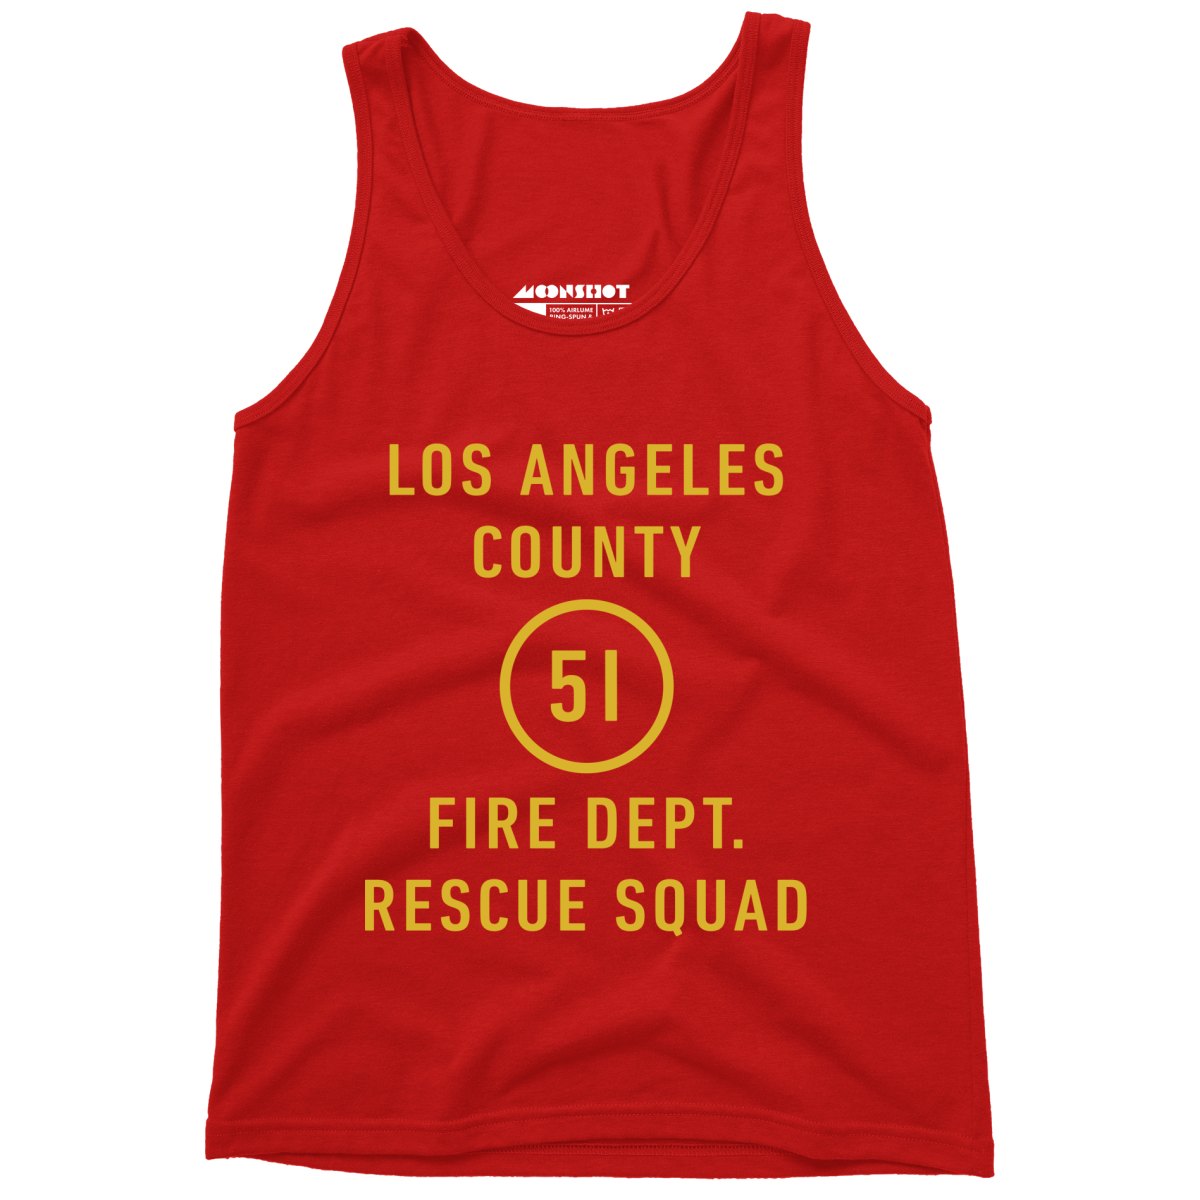 Emergency - Los Angeles County Fire Dept. Squad 51 - Unisex Tank Top